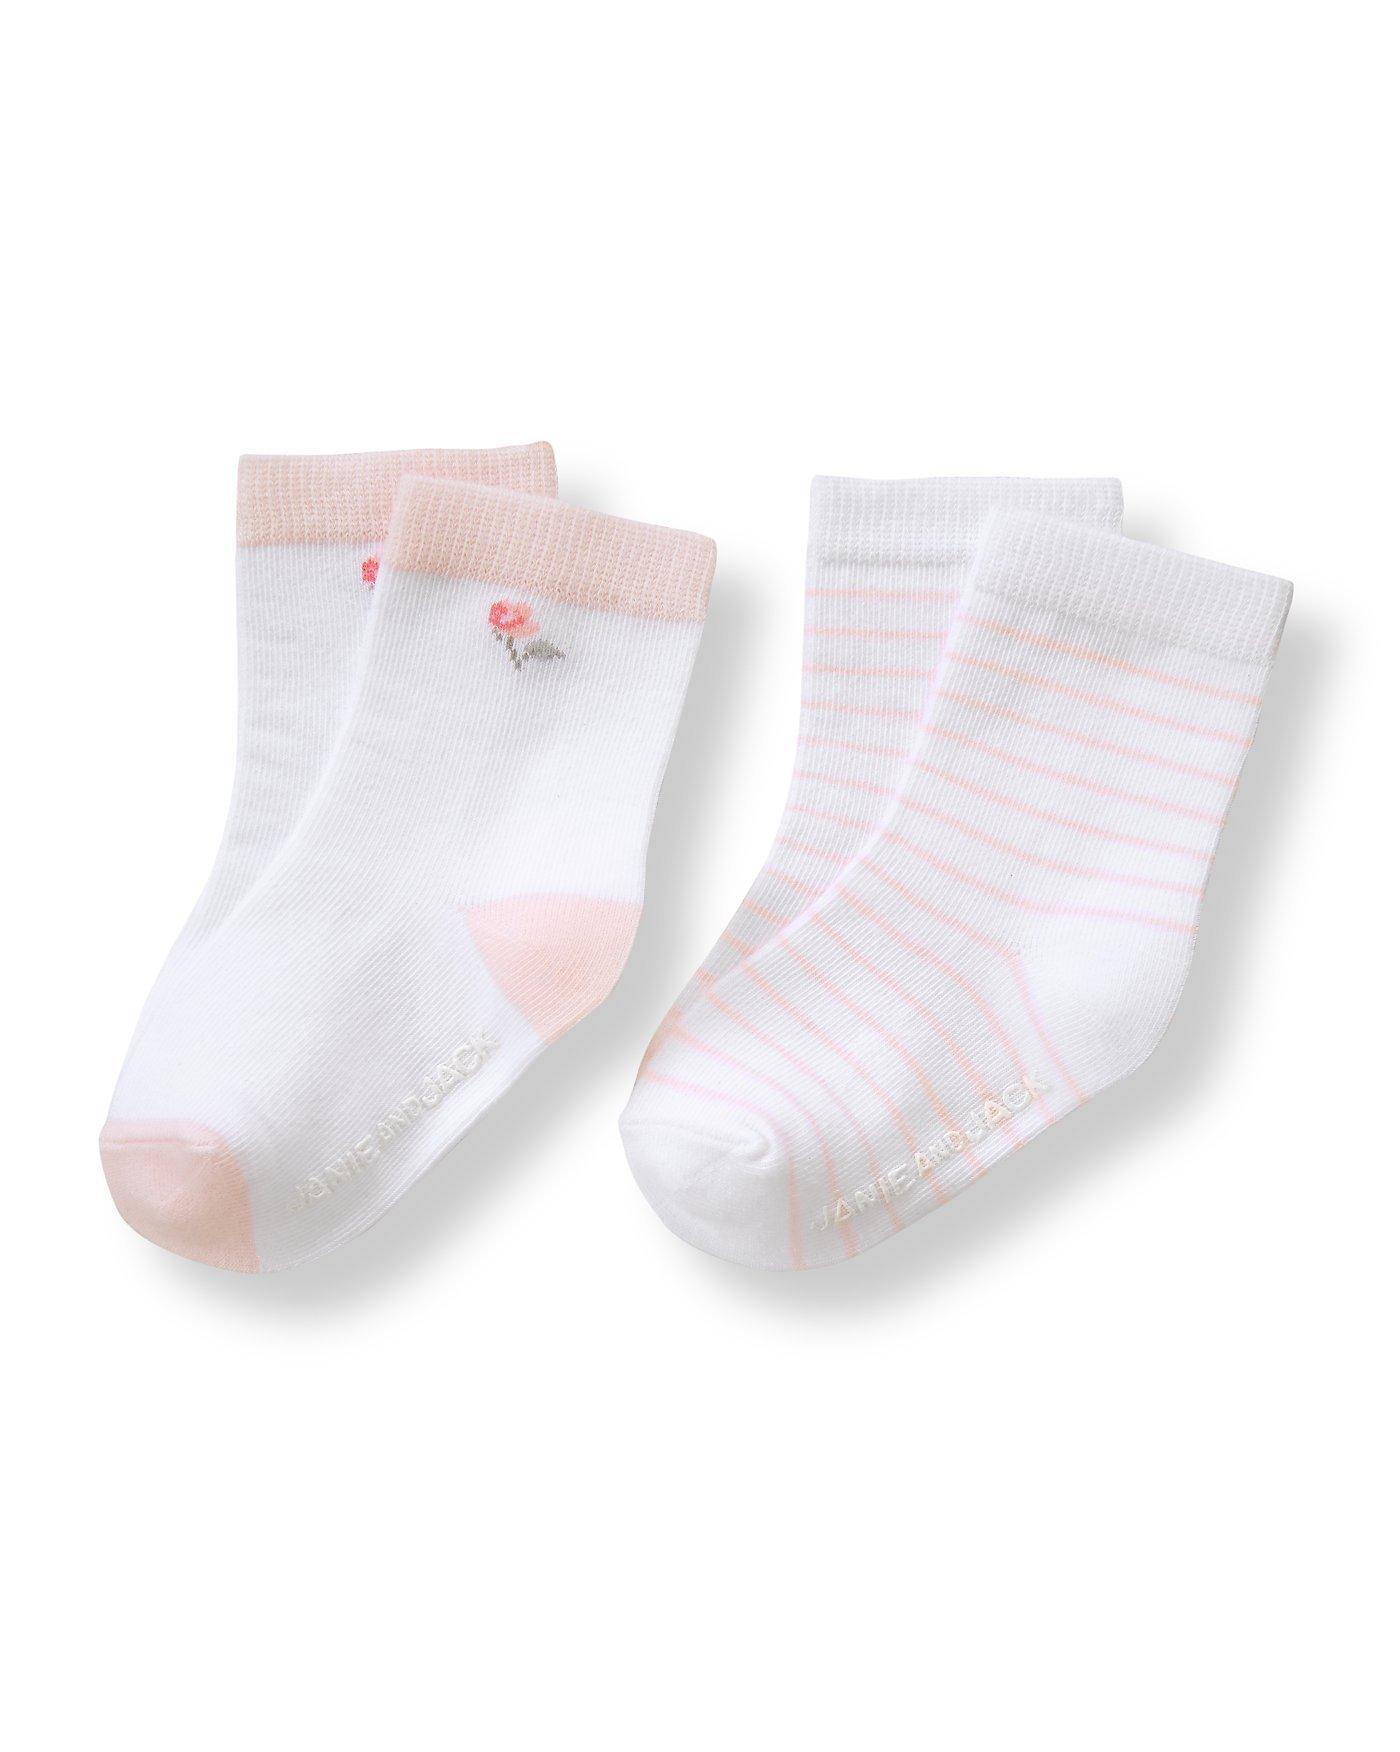 Accessories White Rose Stripe Sock 2-Pack by Janie and Jack